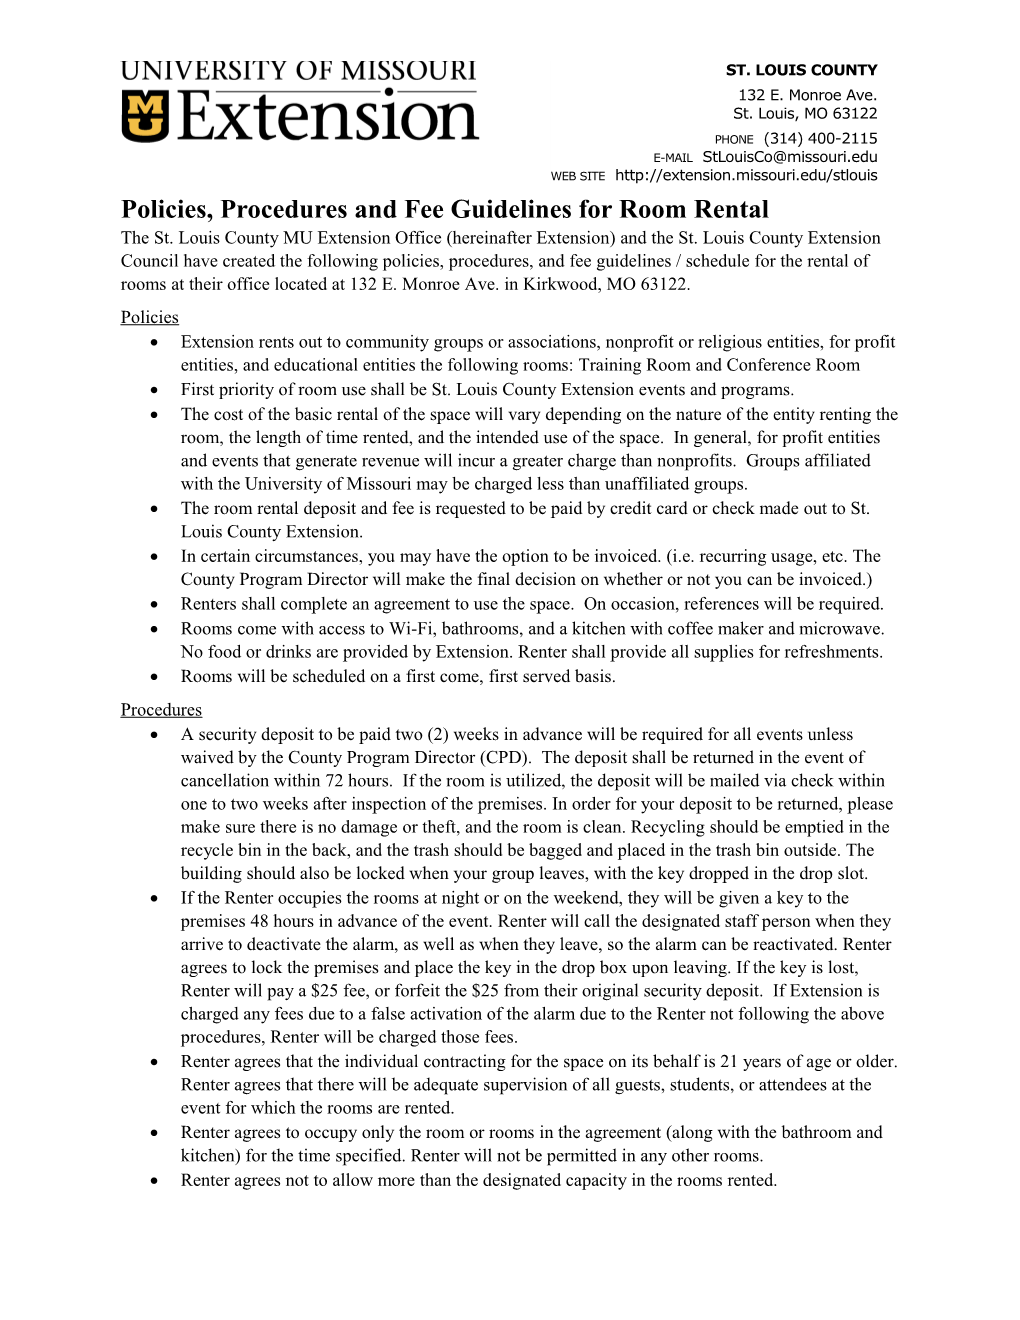 Policies, Procedures and Fee Guidelines for Room Rental